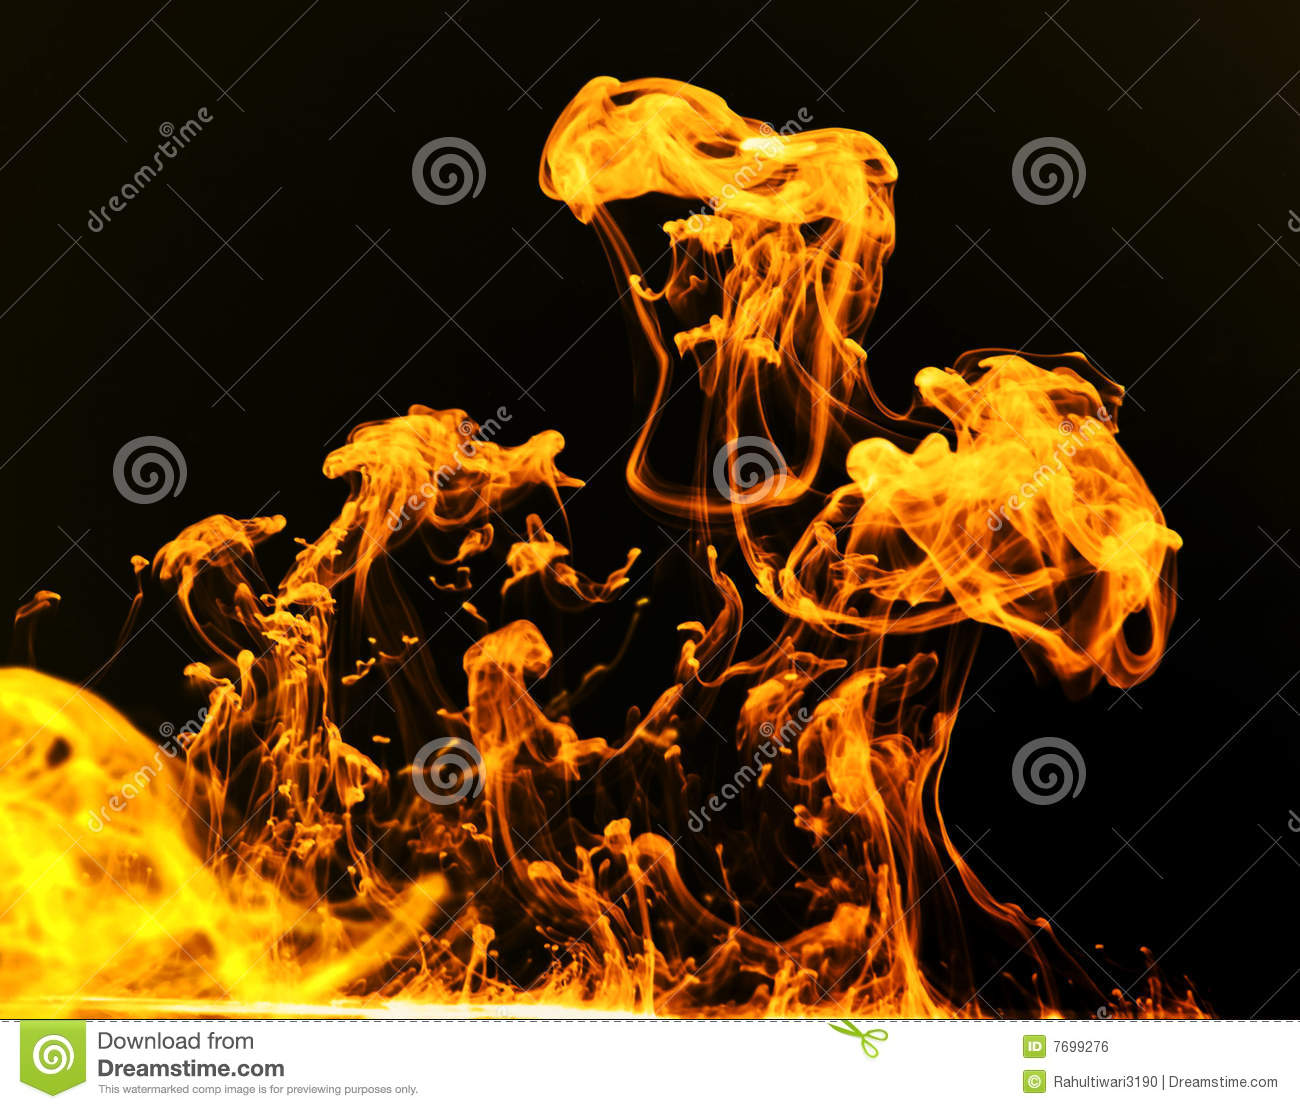 Mountain Of Fire Royalty Free Stock Image   Image  7699276